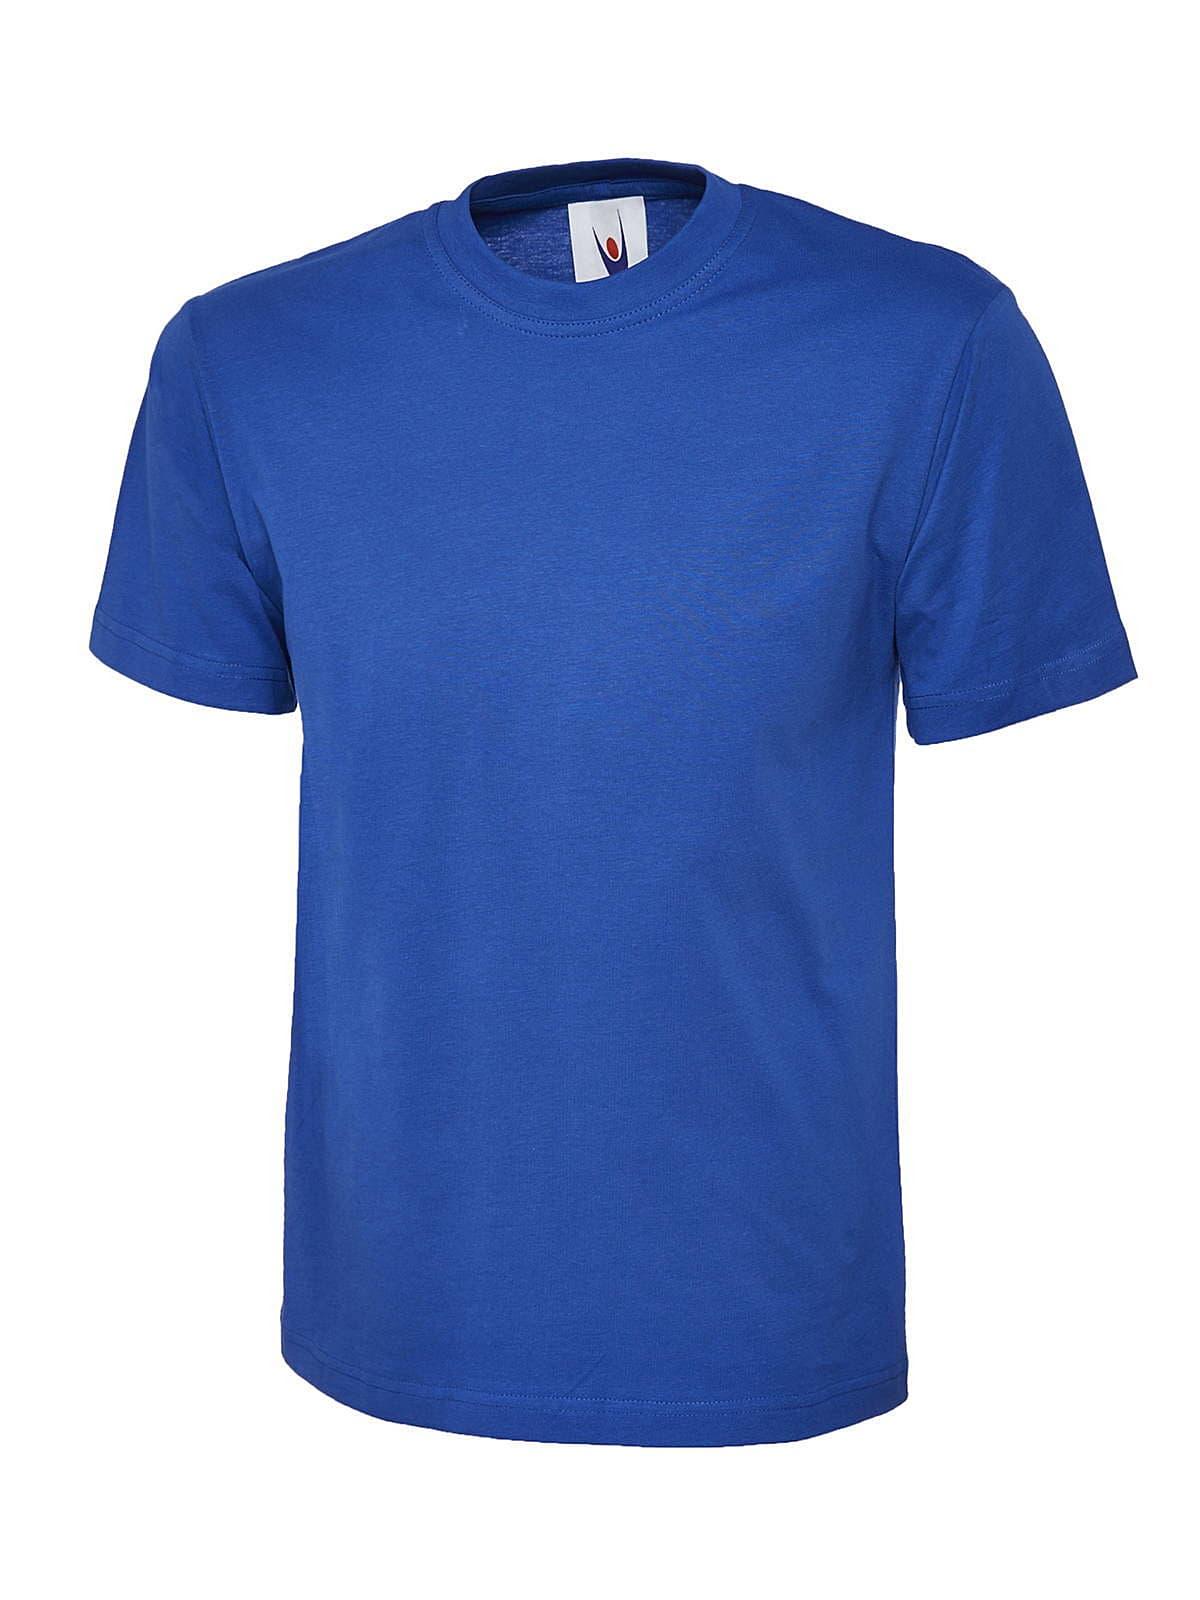 Uneek Childrens 180GSM T-Shirt in Royal Blue (Product Code: UC306)